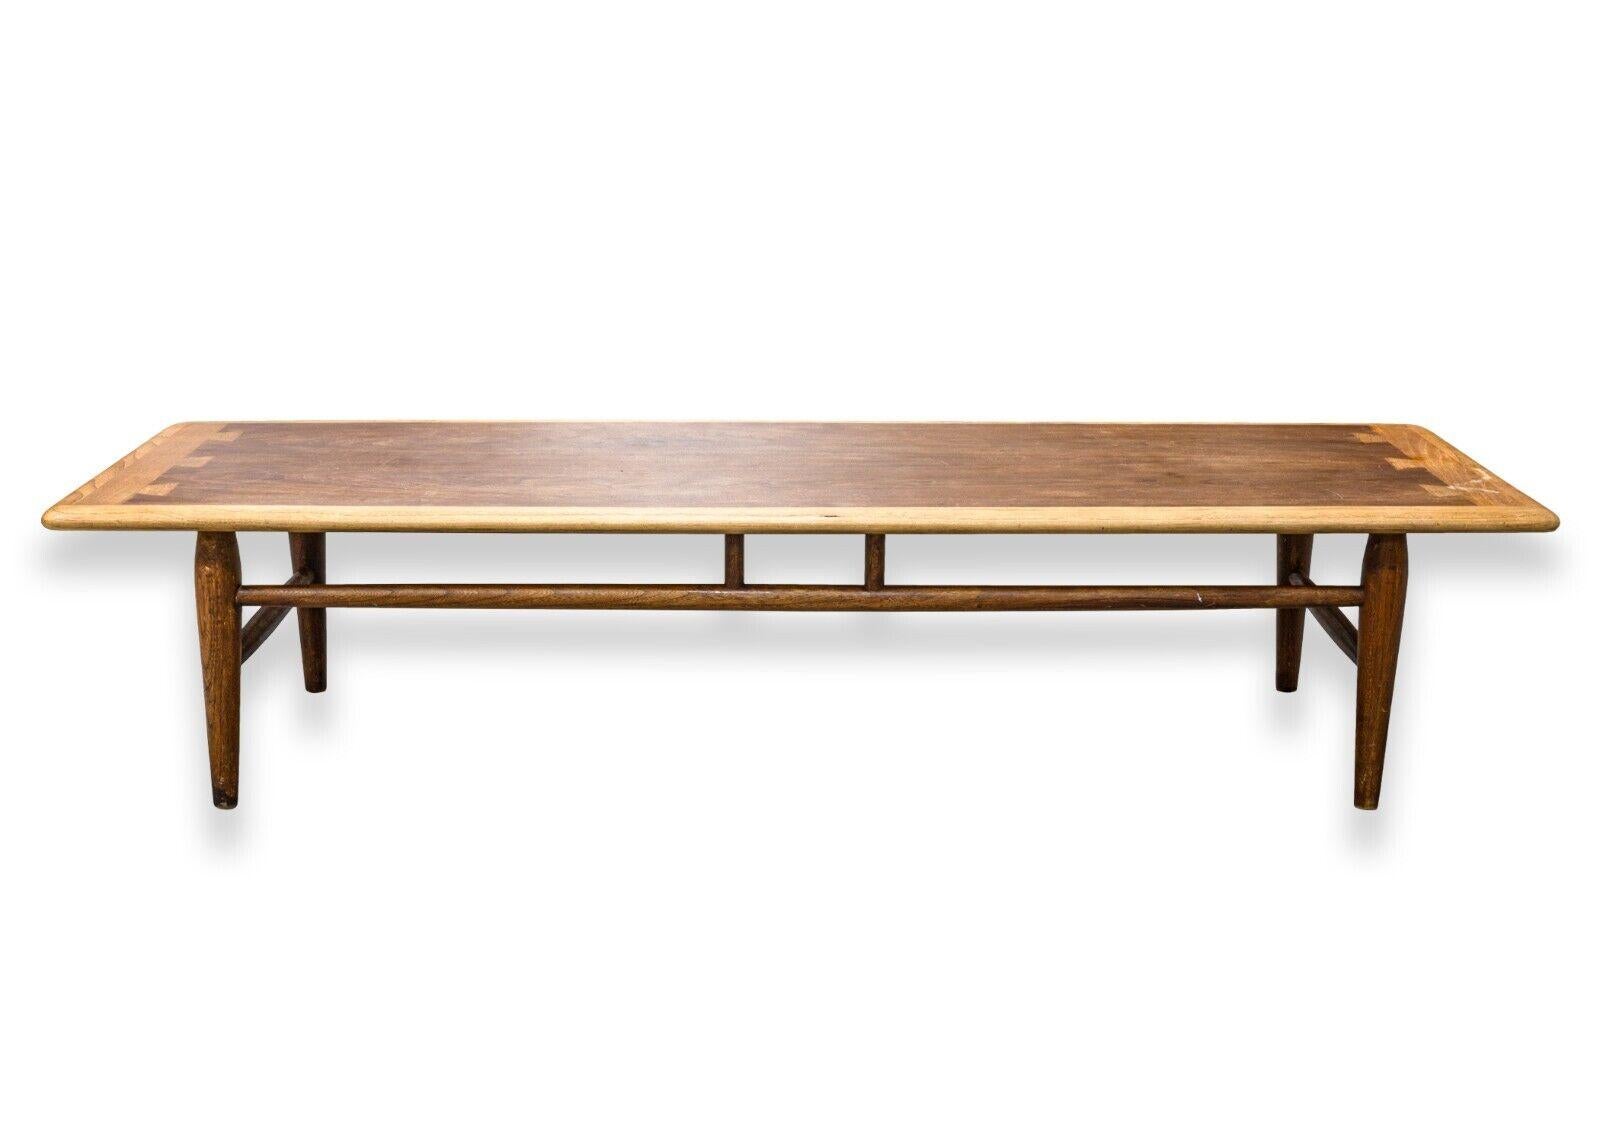 A mid century modern Lane walnut wood low rectangular coffee table. An elegant coffee table from US furniture manufacturer, Lane Furniture. This piece features a gorgeous walnut wood construction, with a unique crafted wood design. The four legs are